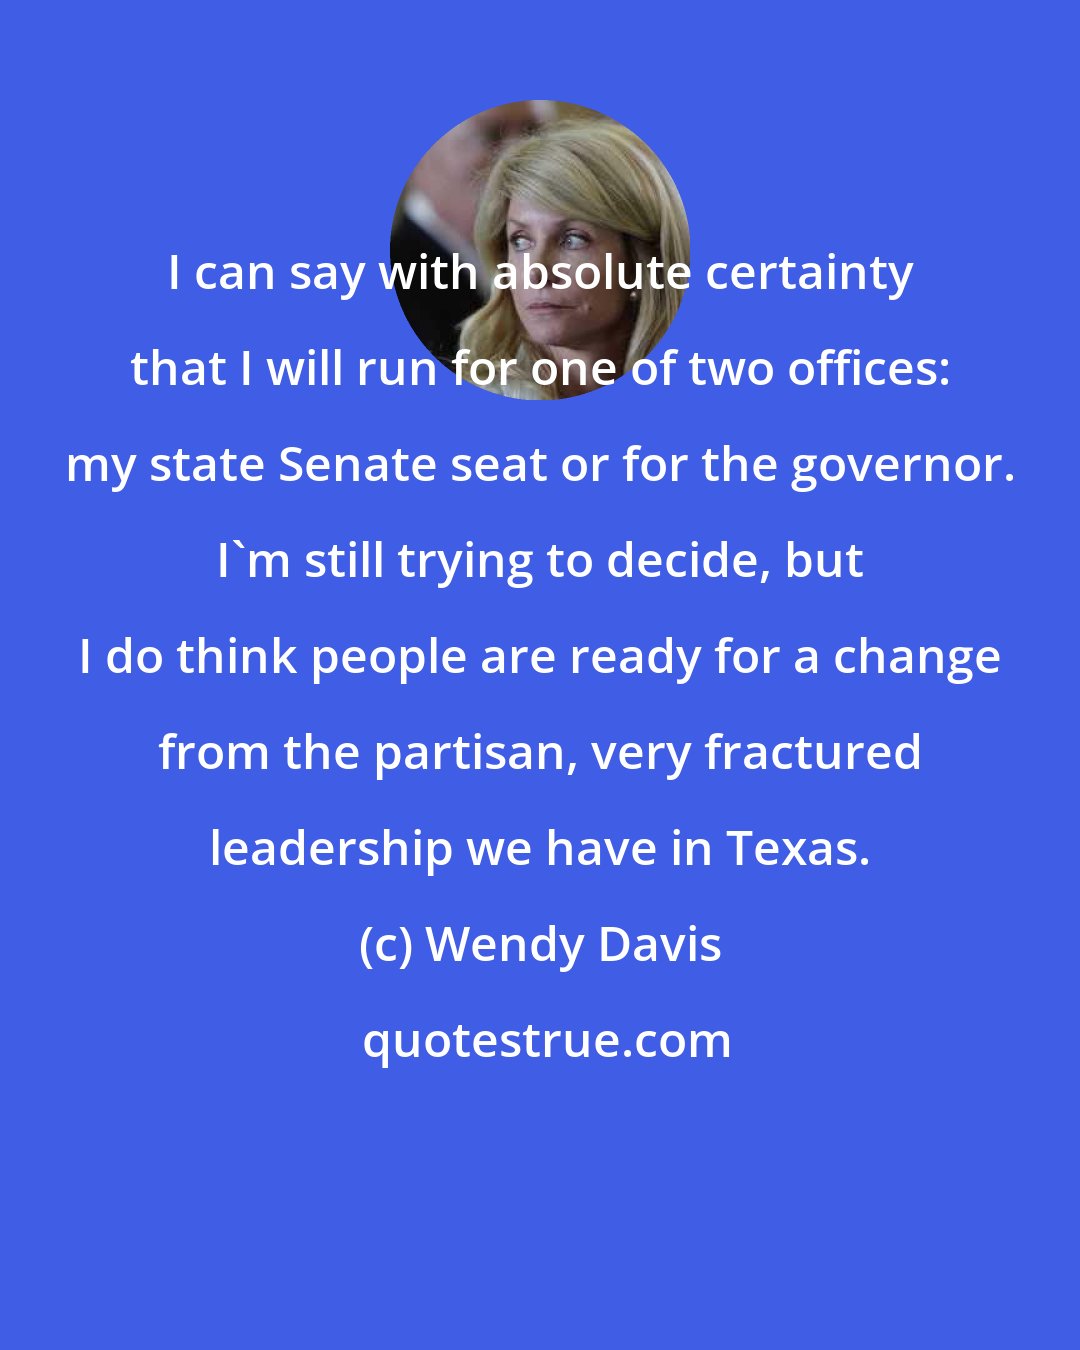 Wendy Davis: I can say with absolute certainty that I will run for one of two offices: my state Senate seat or for the governor. I'm still trying to decide, but I do think people are ready for a change from the partisan, very fractured leadership we have in Texas.